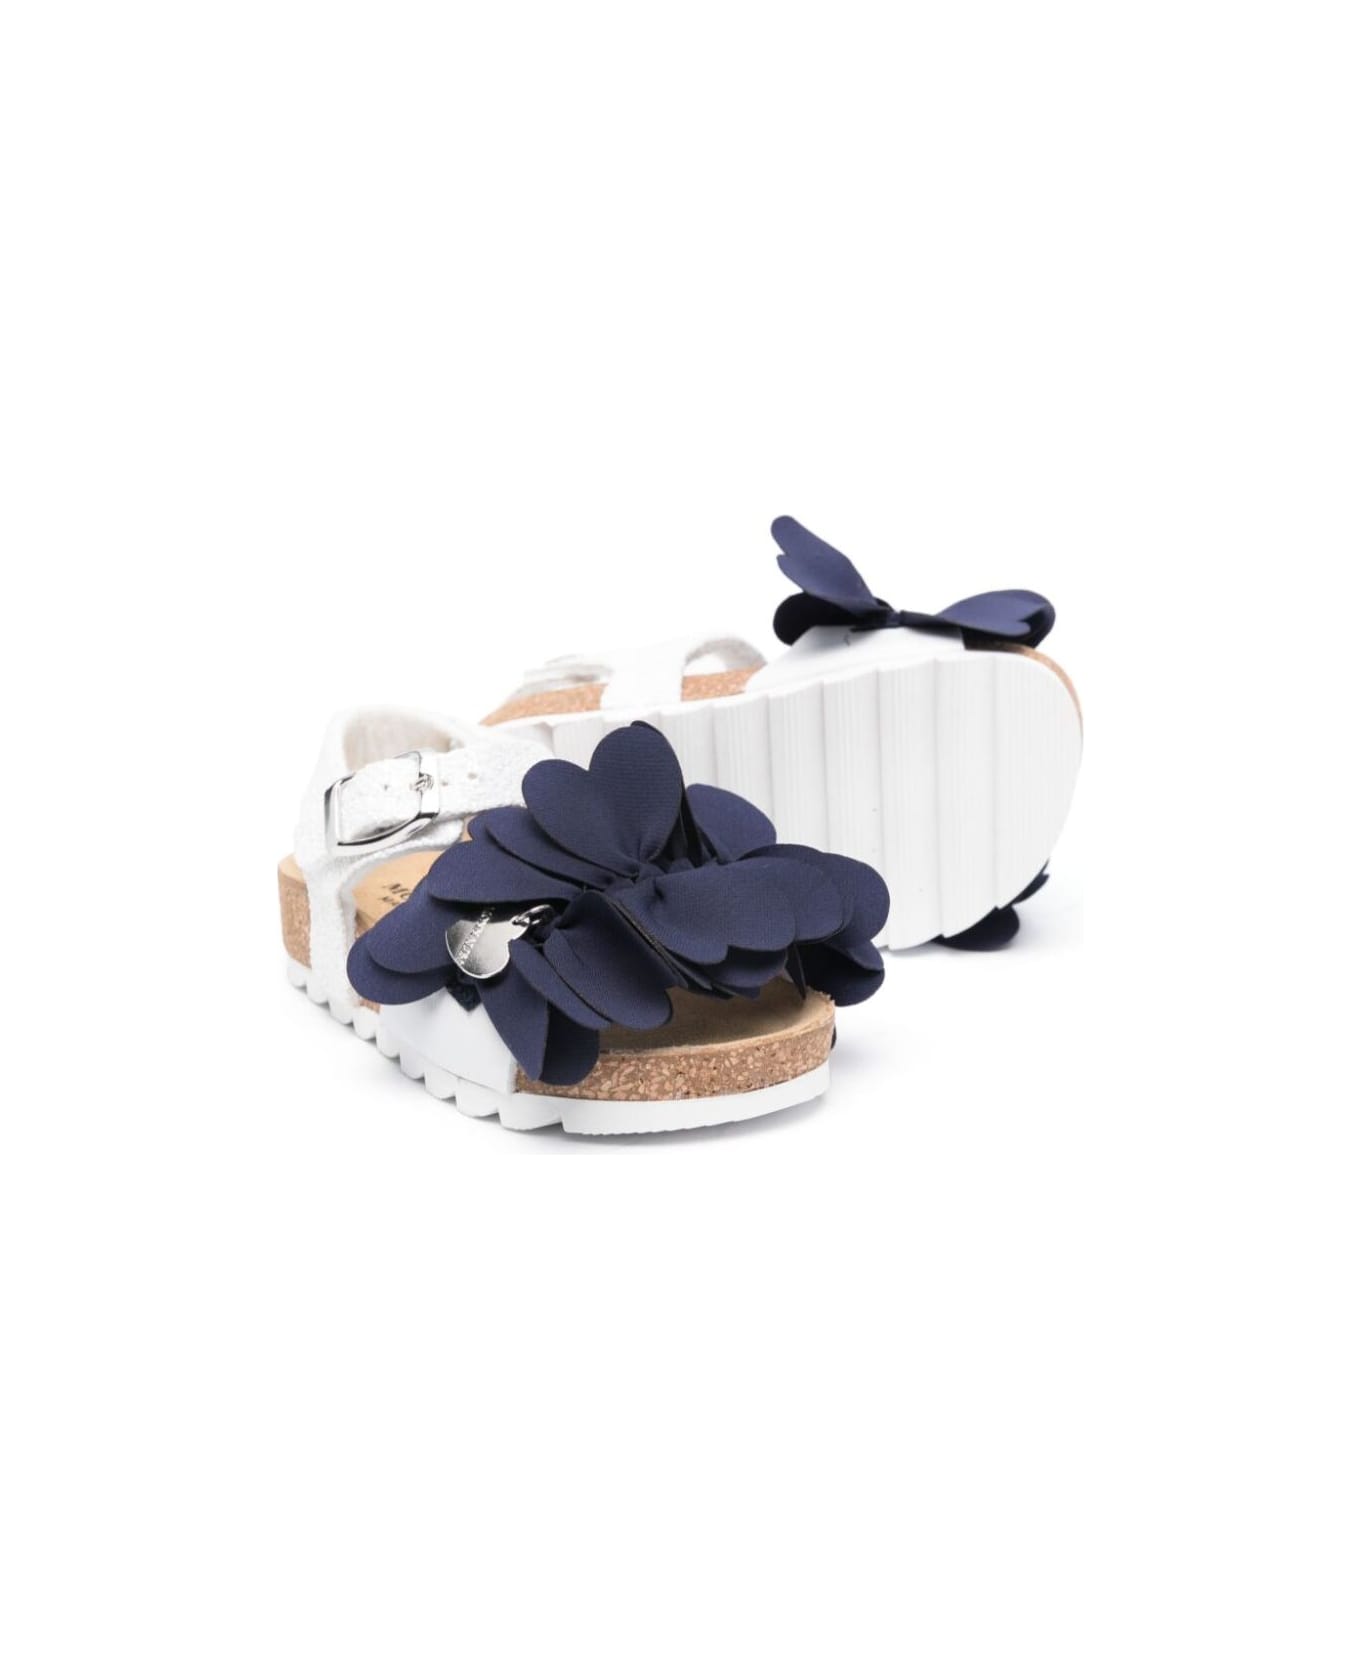 Monnalisa White And Blue Sandals With Heart Shaped Petals And Glitters In Tech Fabric Girl - Multicolor